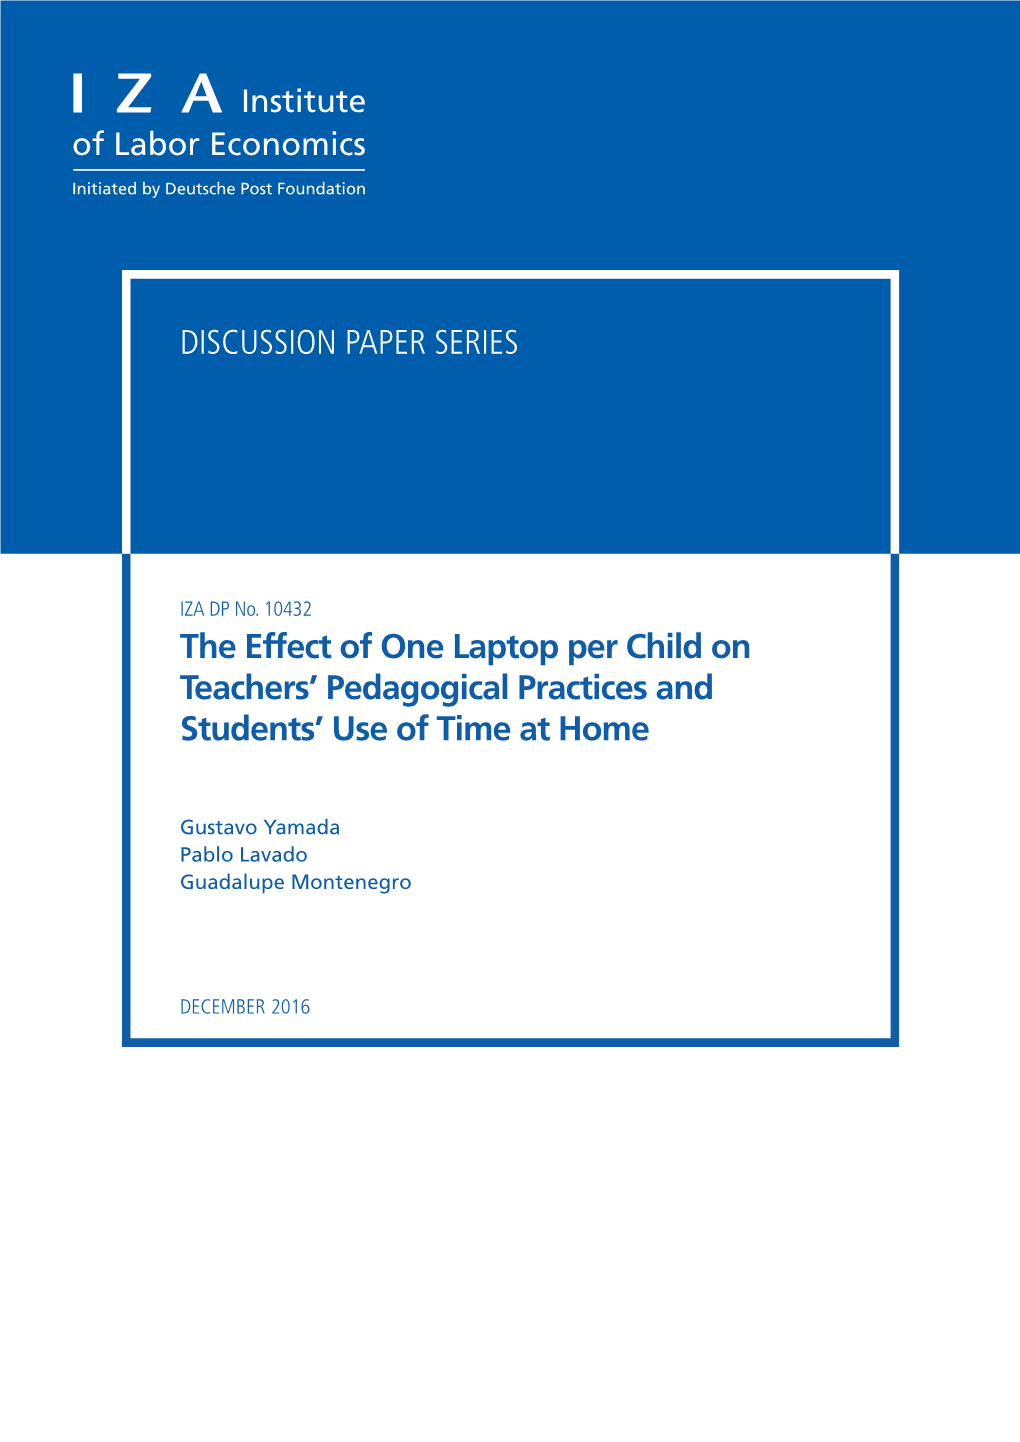 The Effect of One Laptop Per Child on Teachers' Pedagogical Practices